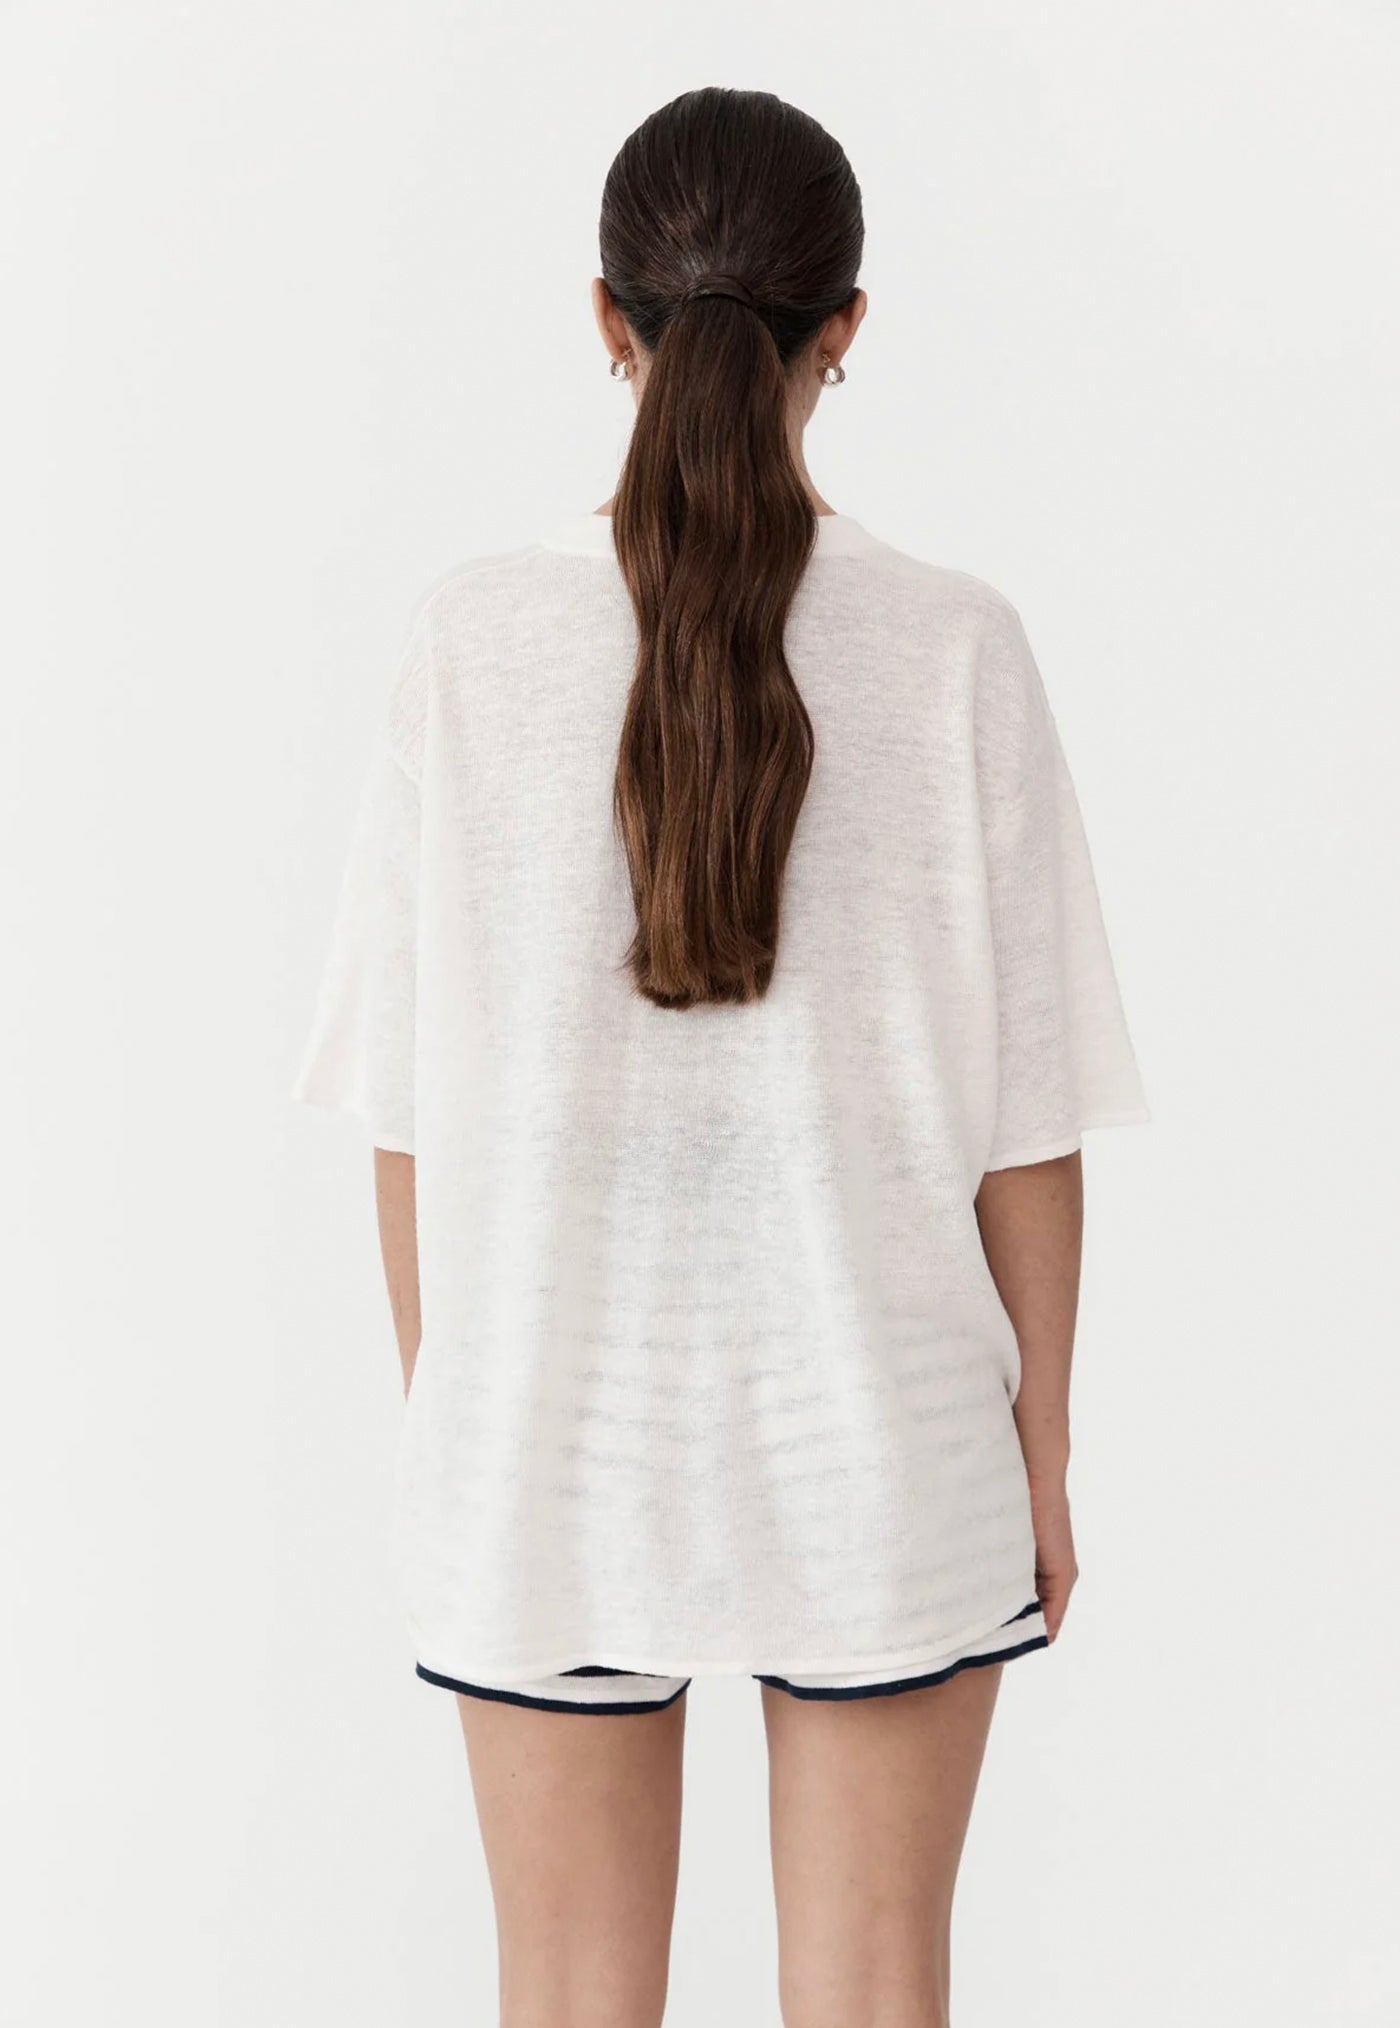 Copain Knit Tee - Off White sold by Angel Divine